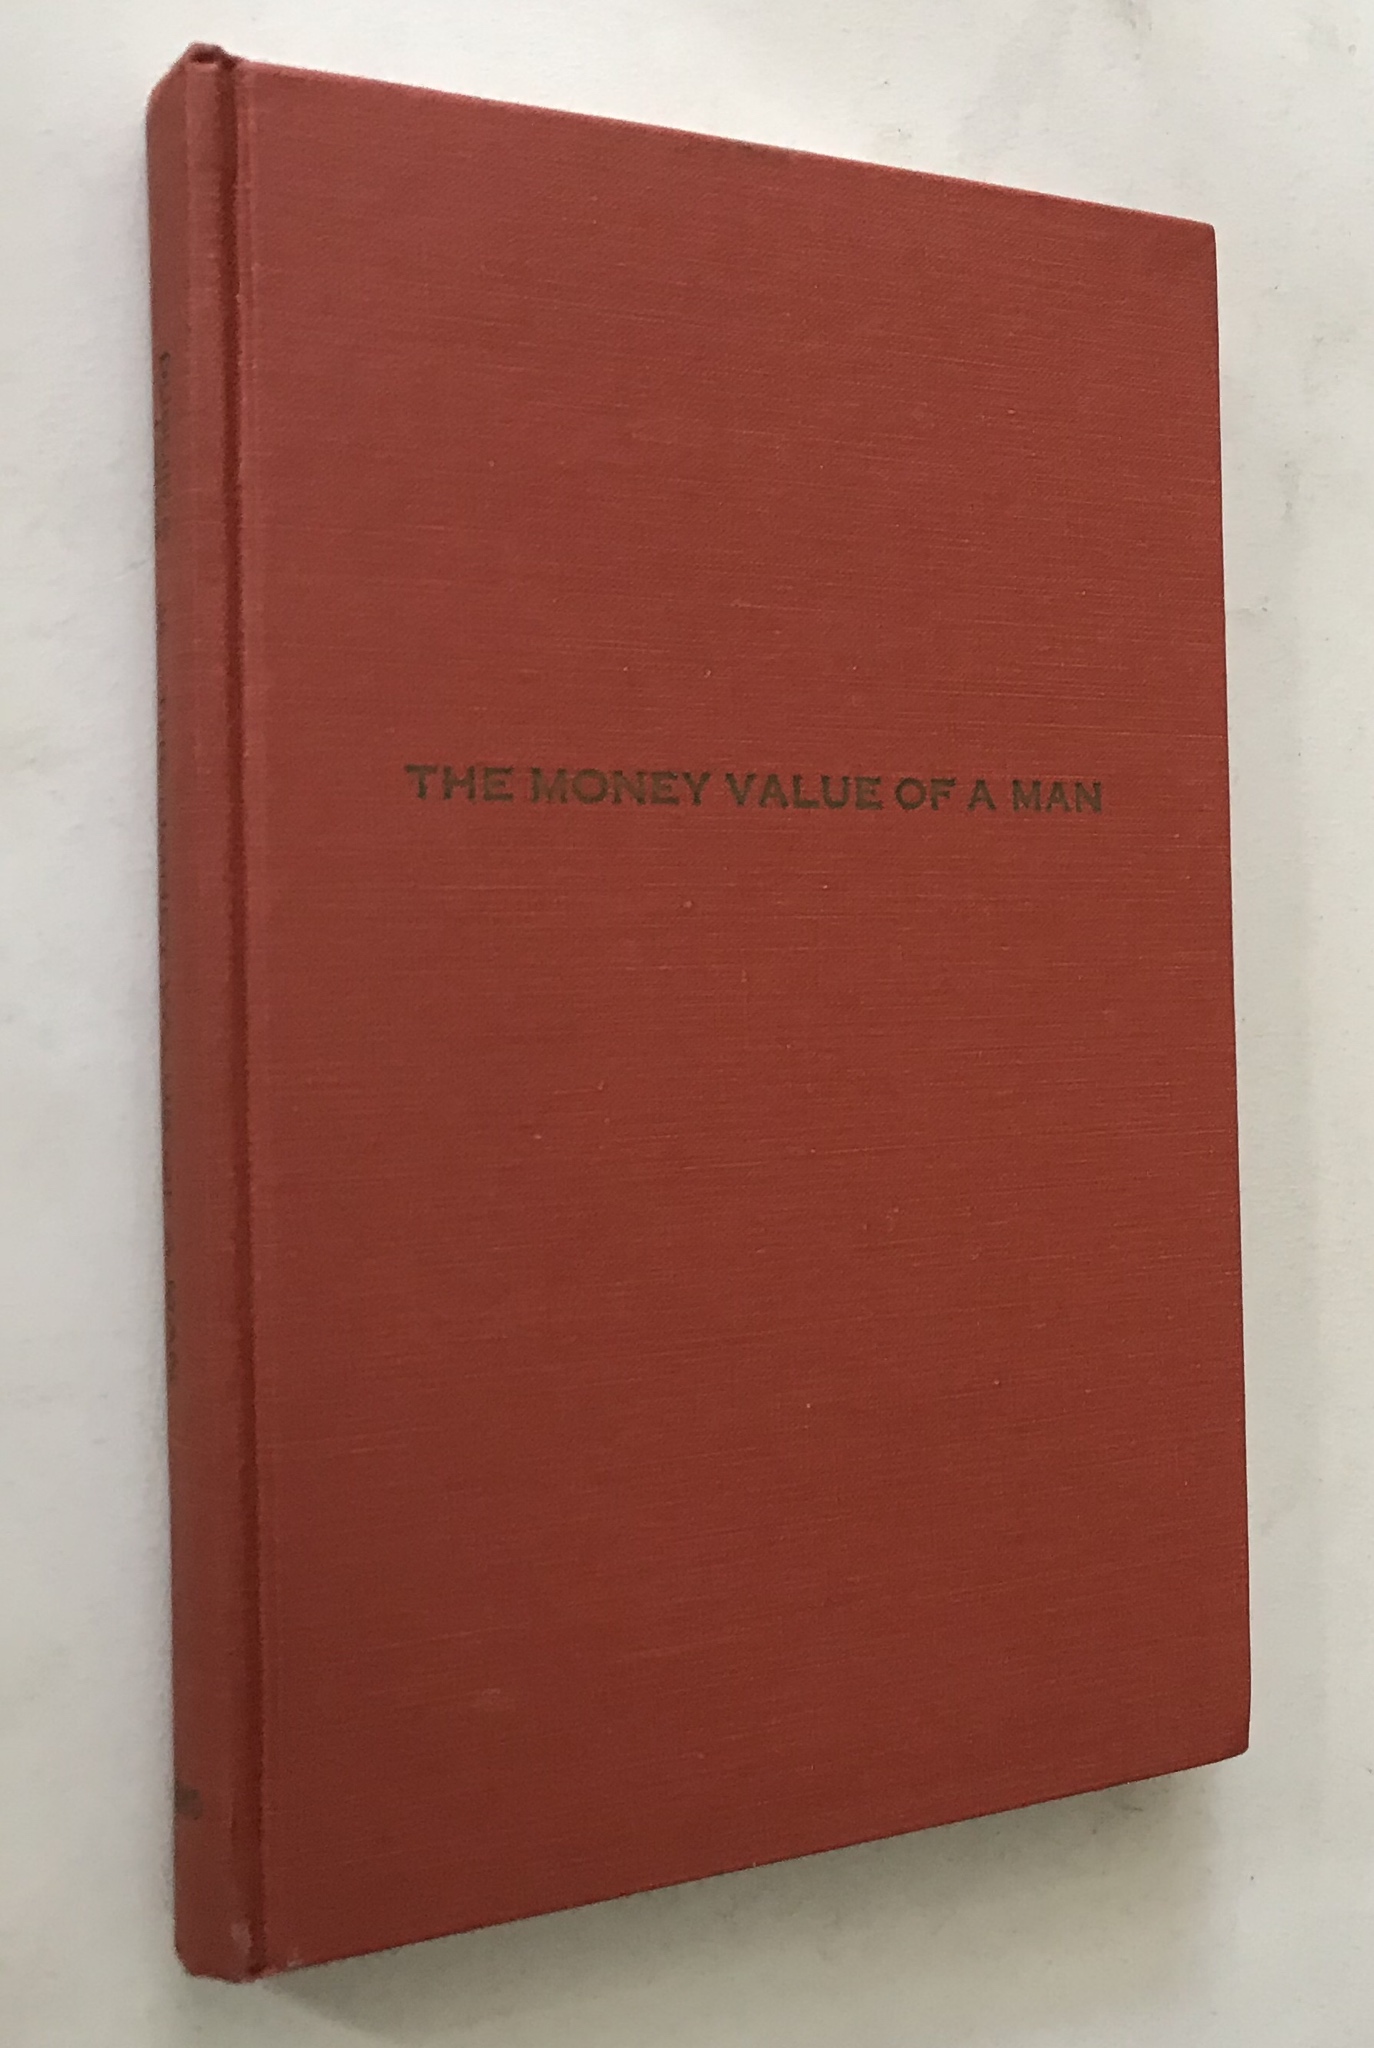 The Money Value of a Man (Public Health in America Series) - Louis I. Dublin (Author), Alfred J. Lotka (Author)